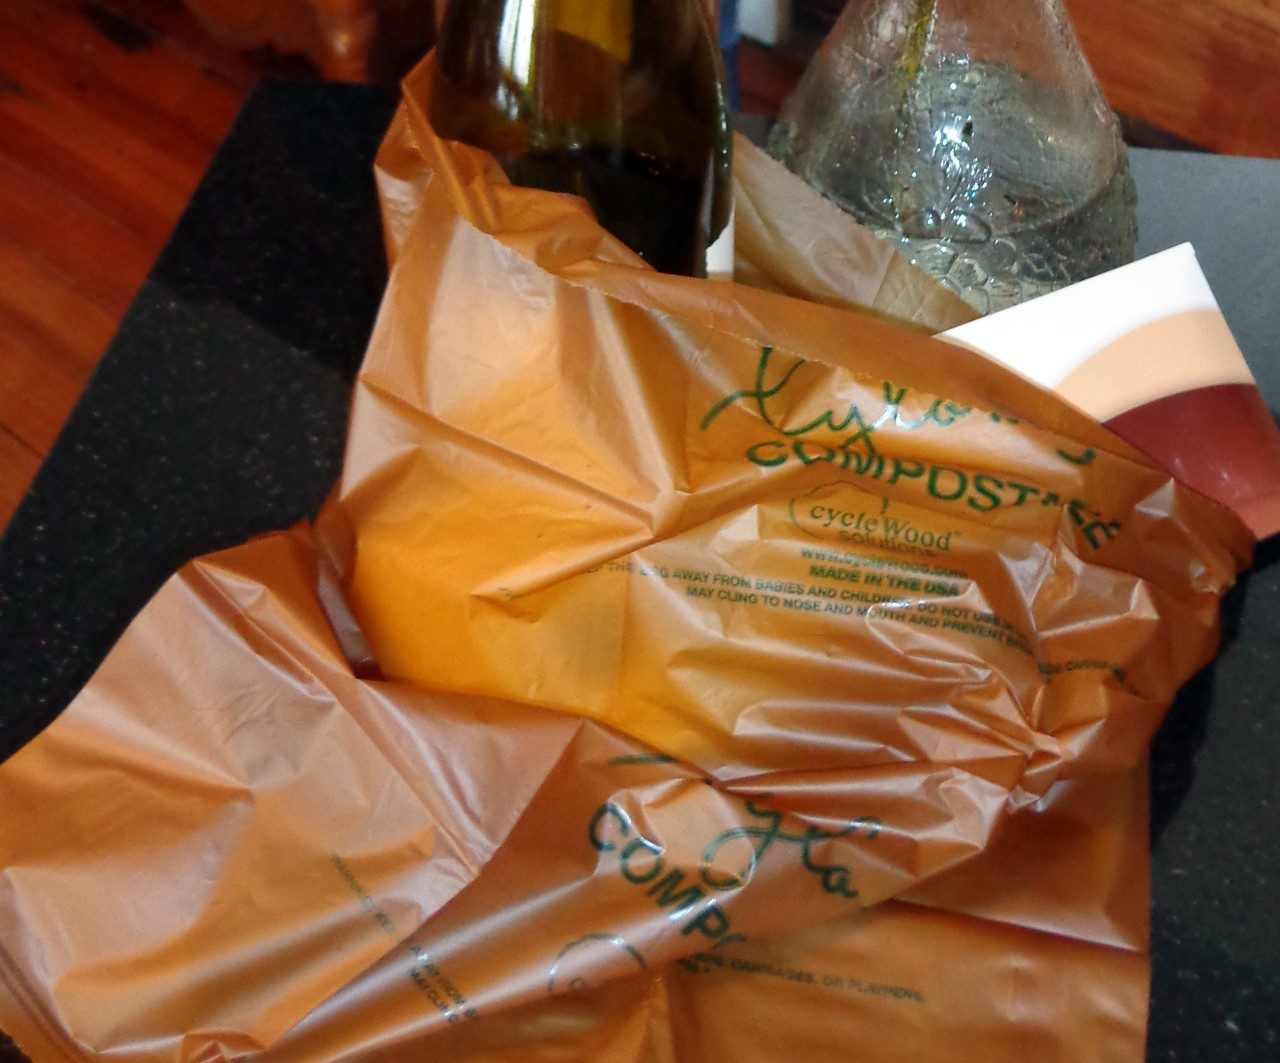 This cycleWood grocery bag will decompose in 180 days when composted.